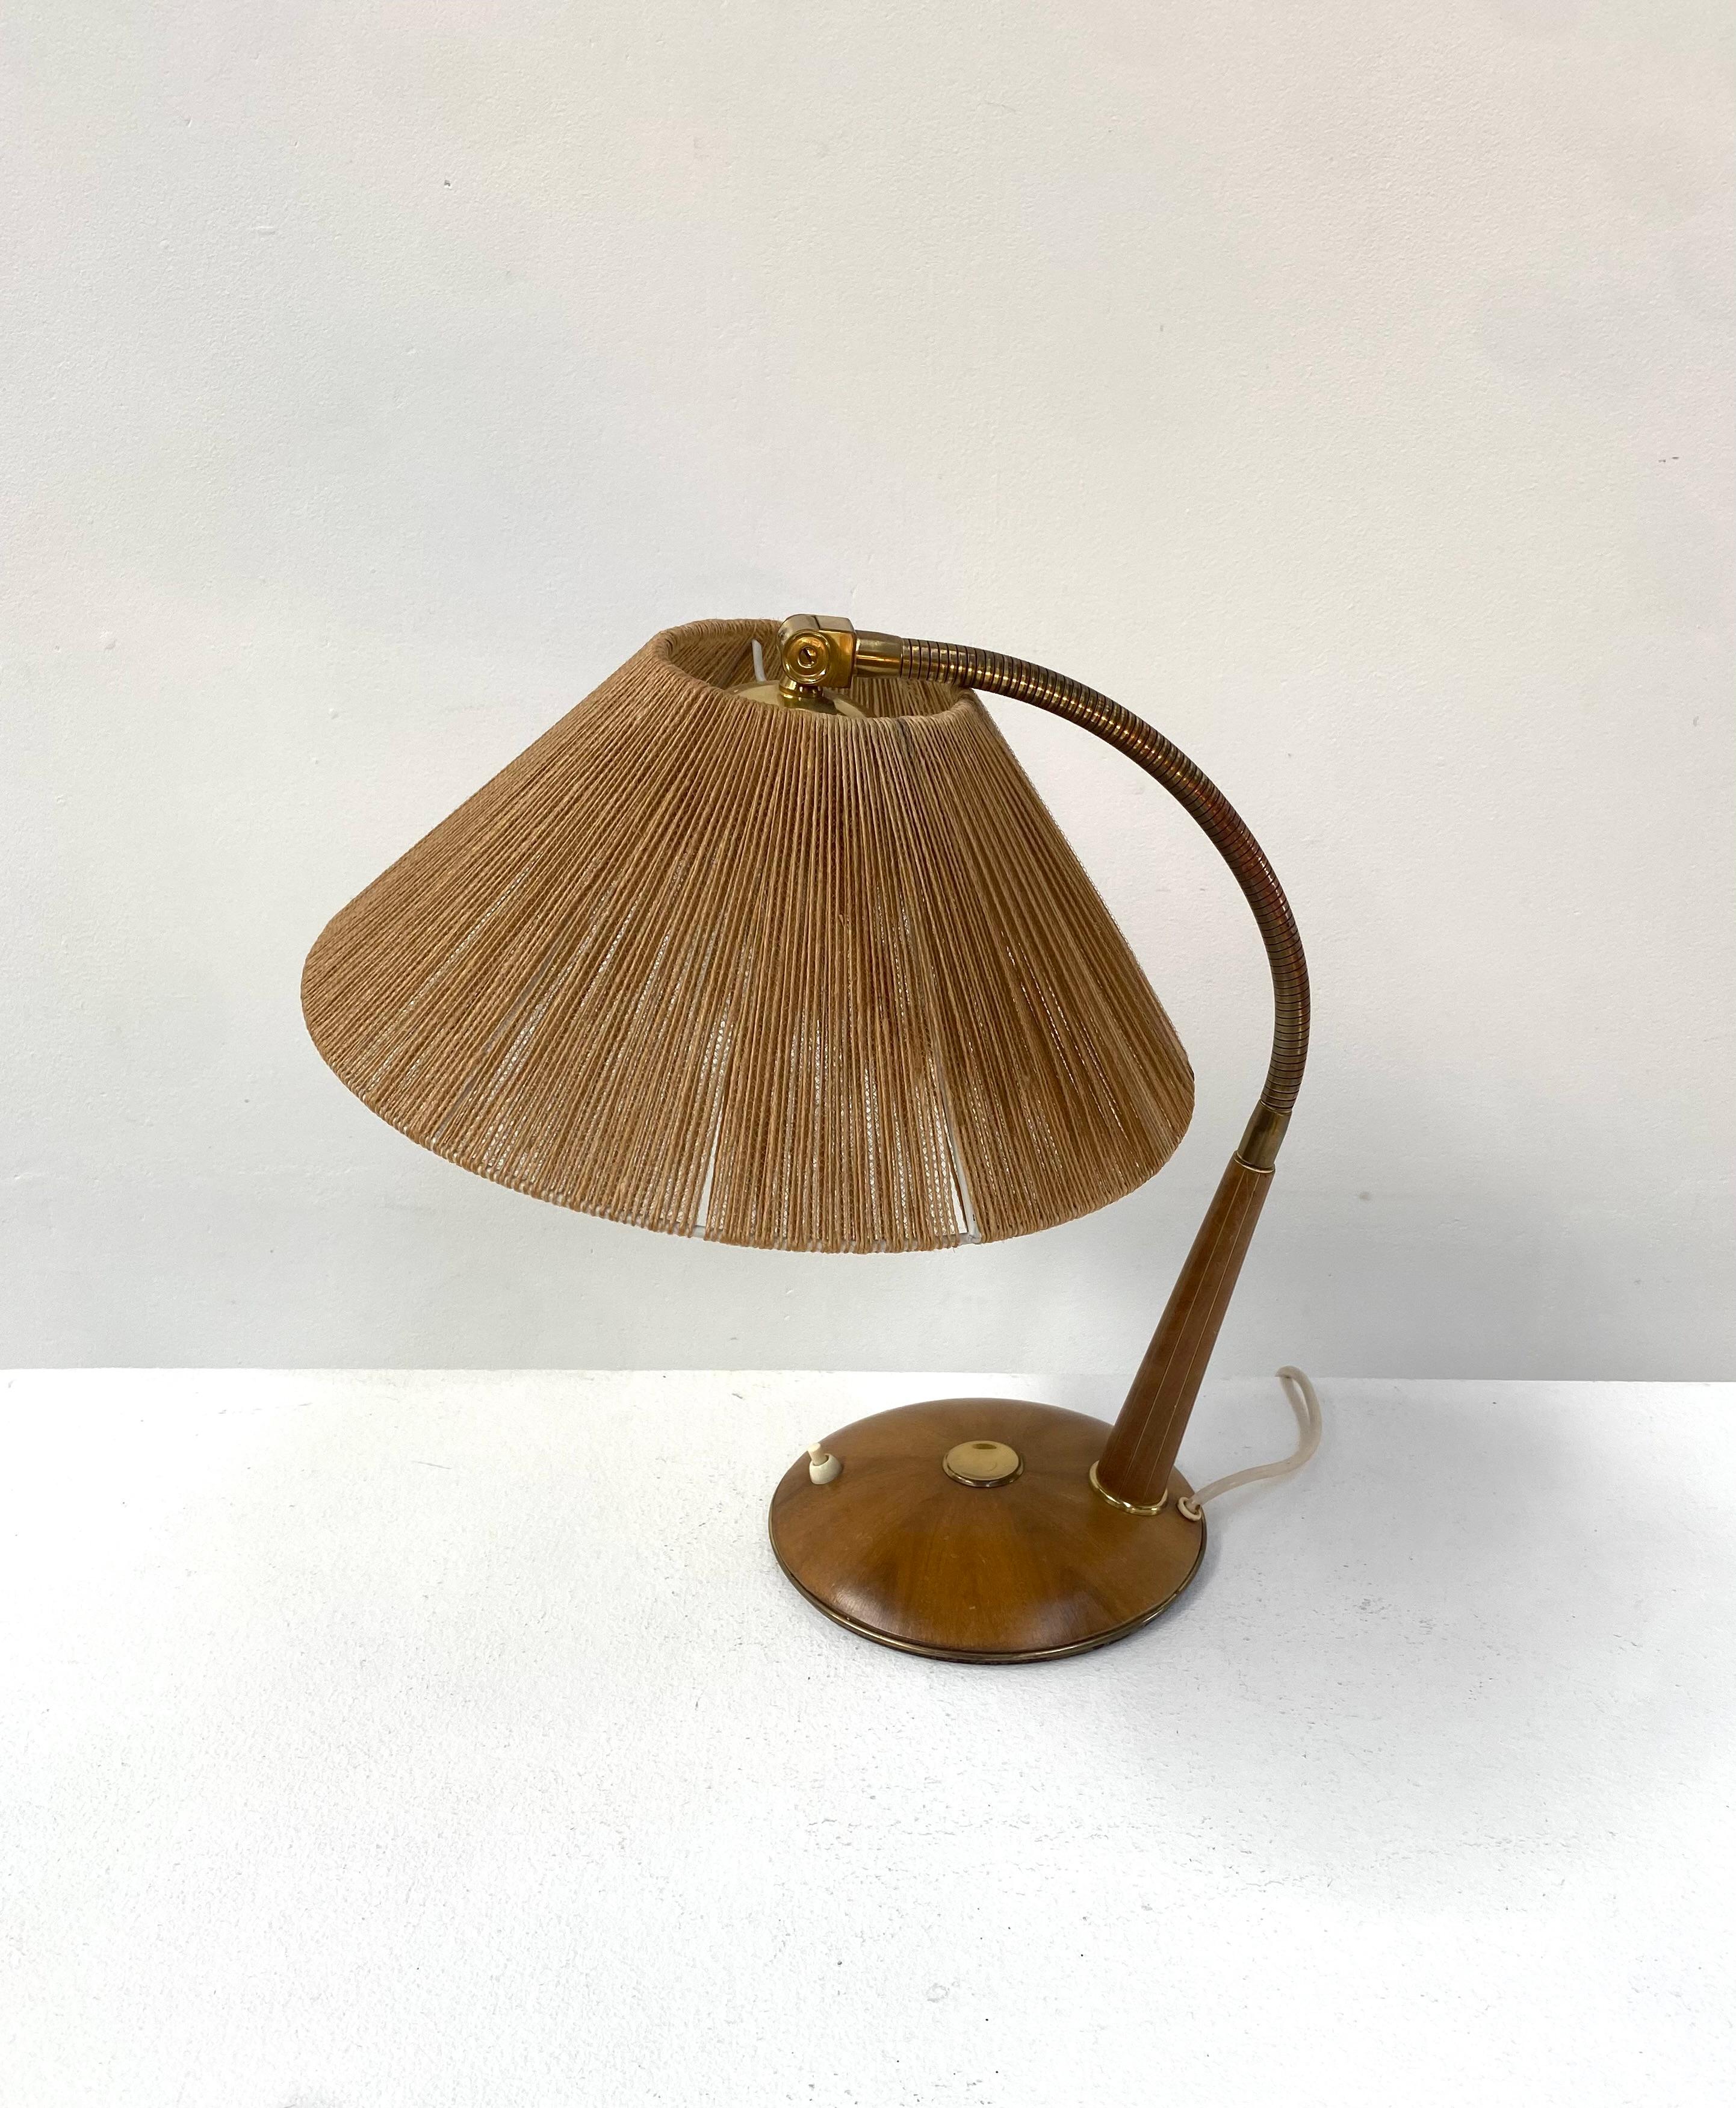 A great Danish table lamp made of teak, brass and sisal. Model 2655. Designed and manufactured in Switzerland by Temde Leuchten in the sixties by Temde in Switzerland. The sisal lampshade in combination with a E27 (US E26) light bulb creates a